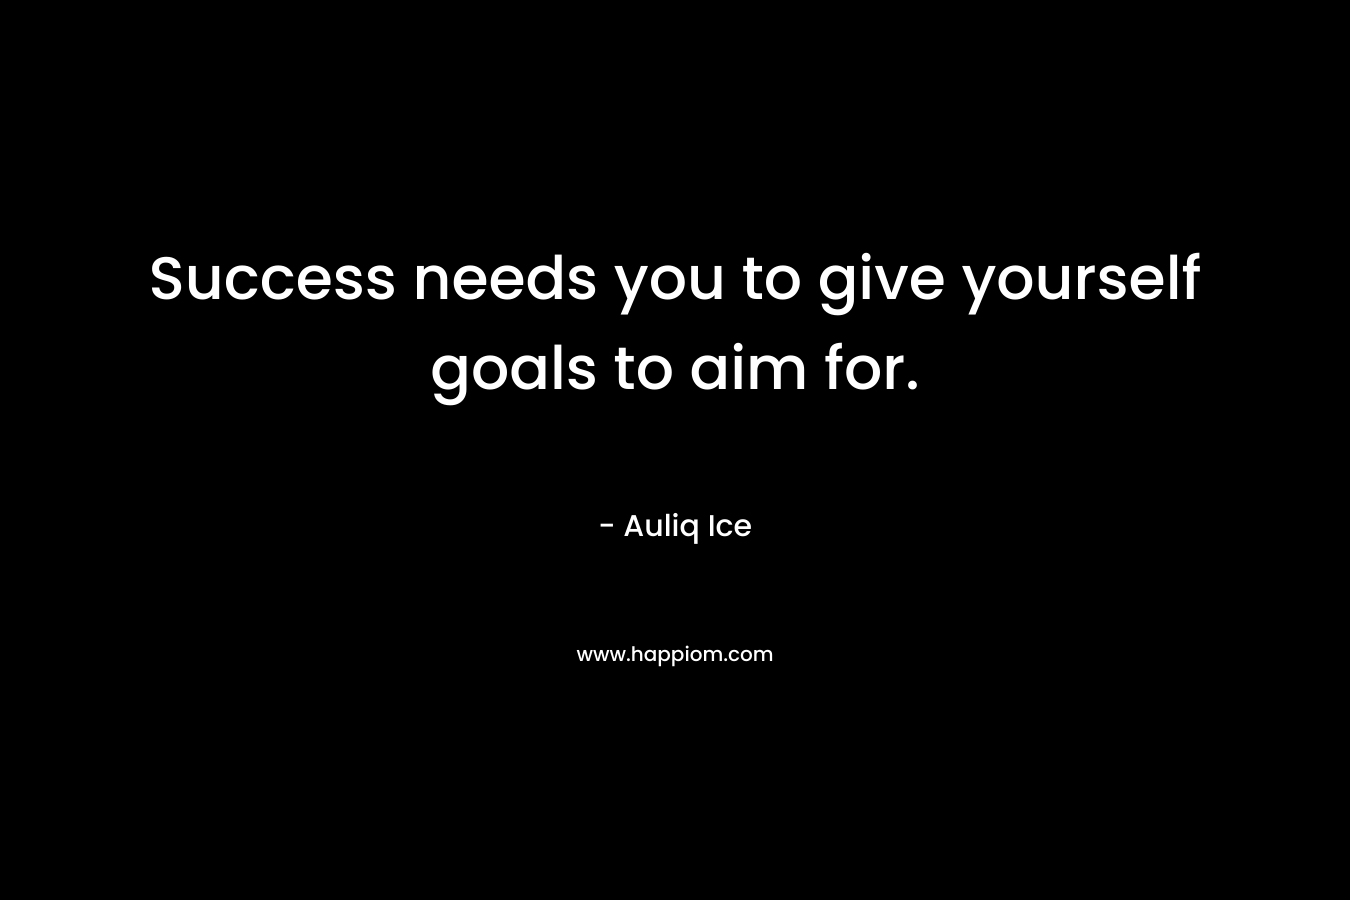 Success needs you to give yourself goals to aim for.